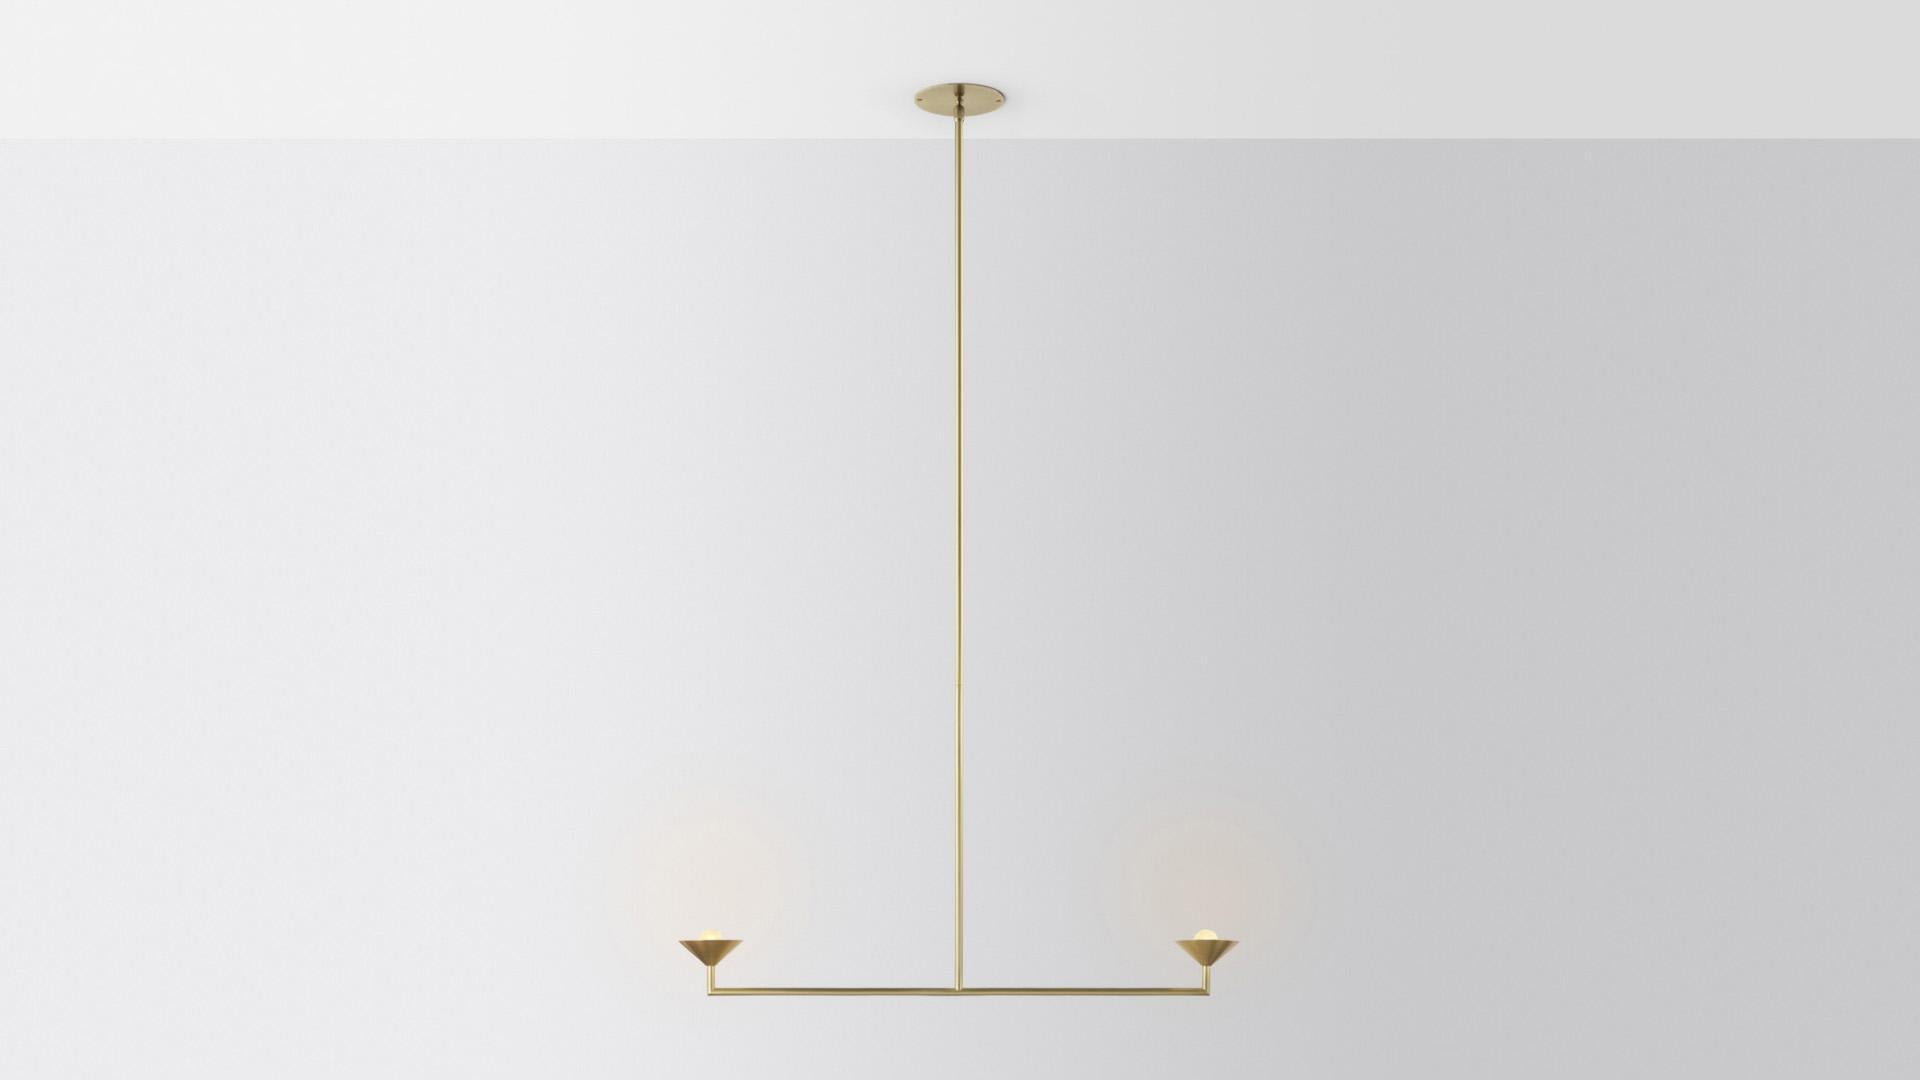 Double drop pendant light by Volker Haug
Dimensions: d 10.5 x w 90.5 x h 70 cm 
Material: Brass. 
Finish: Polished, aged, brushed, bronzed, blackened, or plated
Suspension: As specified (minimum 700mm)
Light: G4 - 12V, LED x 2
Power supply: